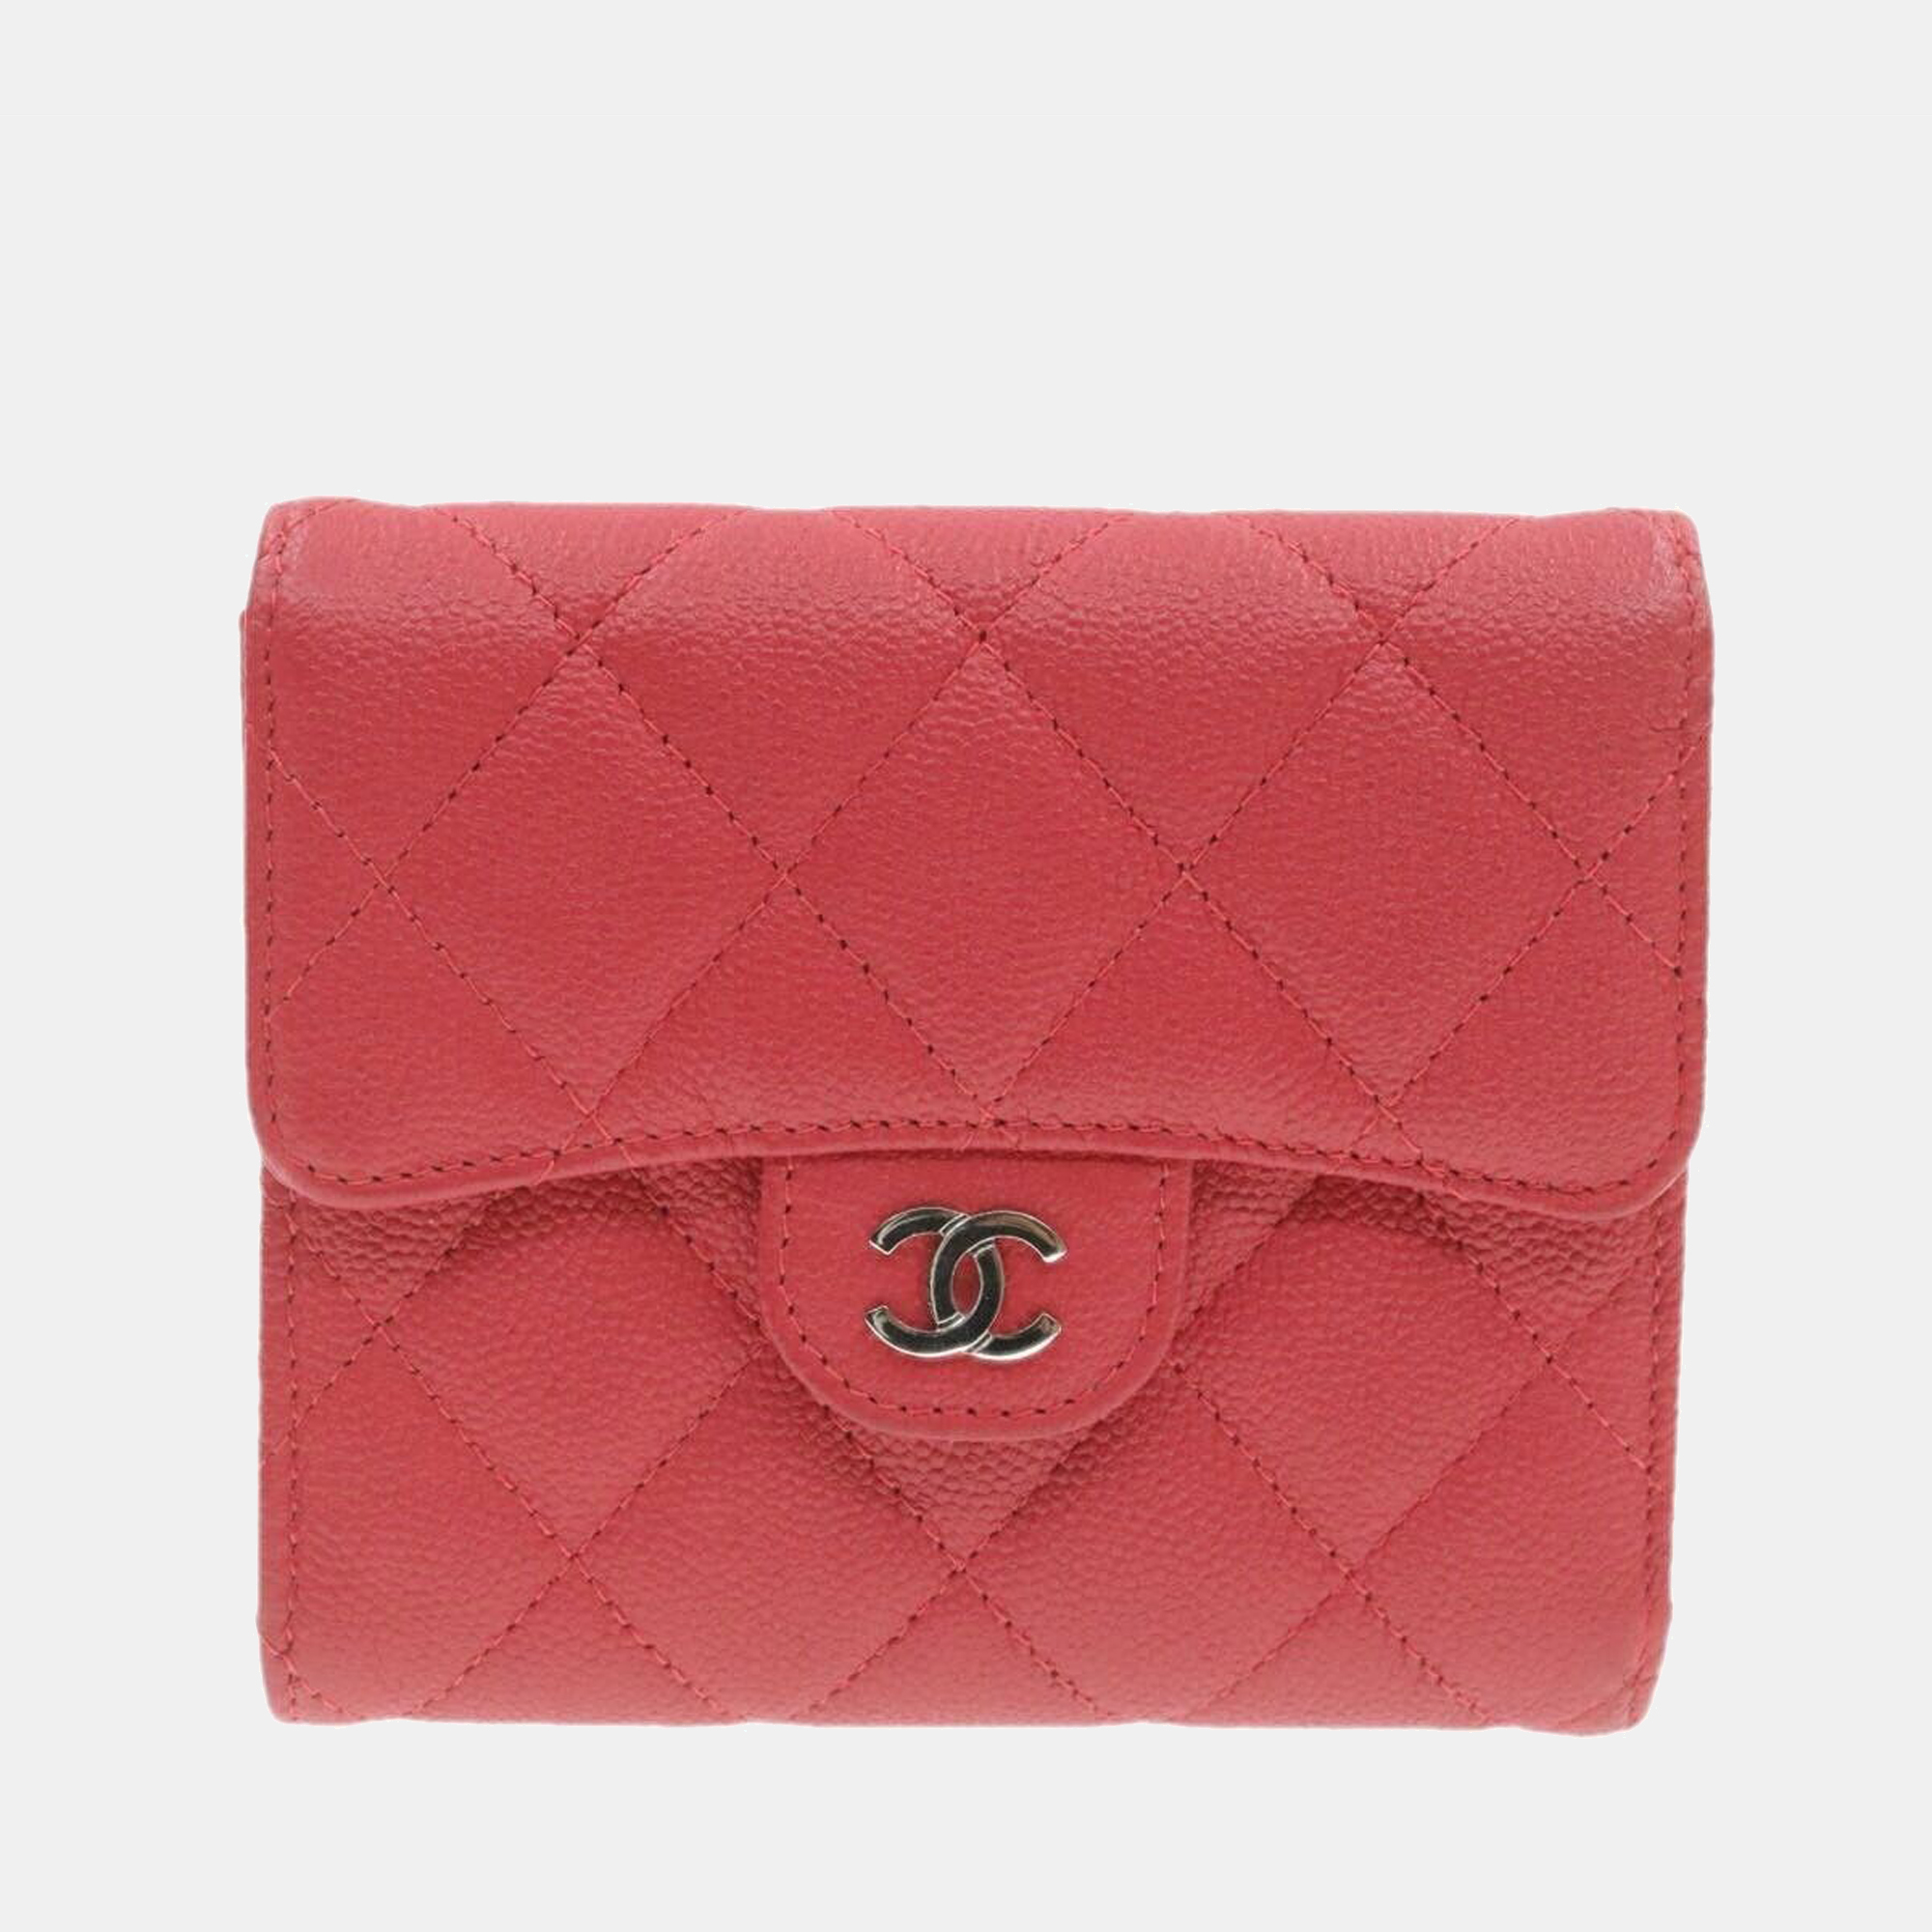 Chanel pink caviar leather flap wallet